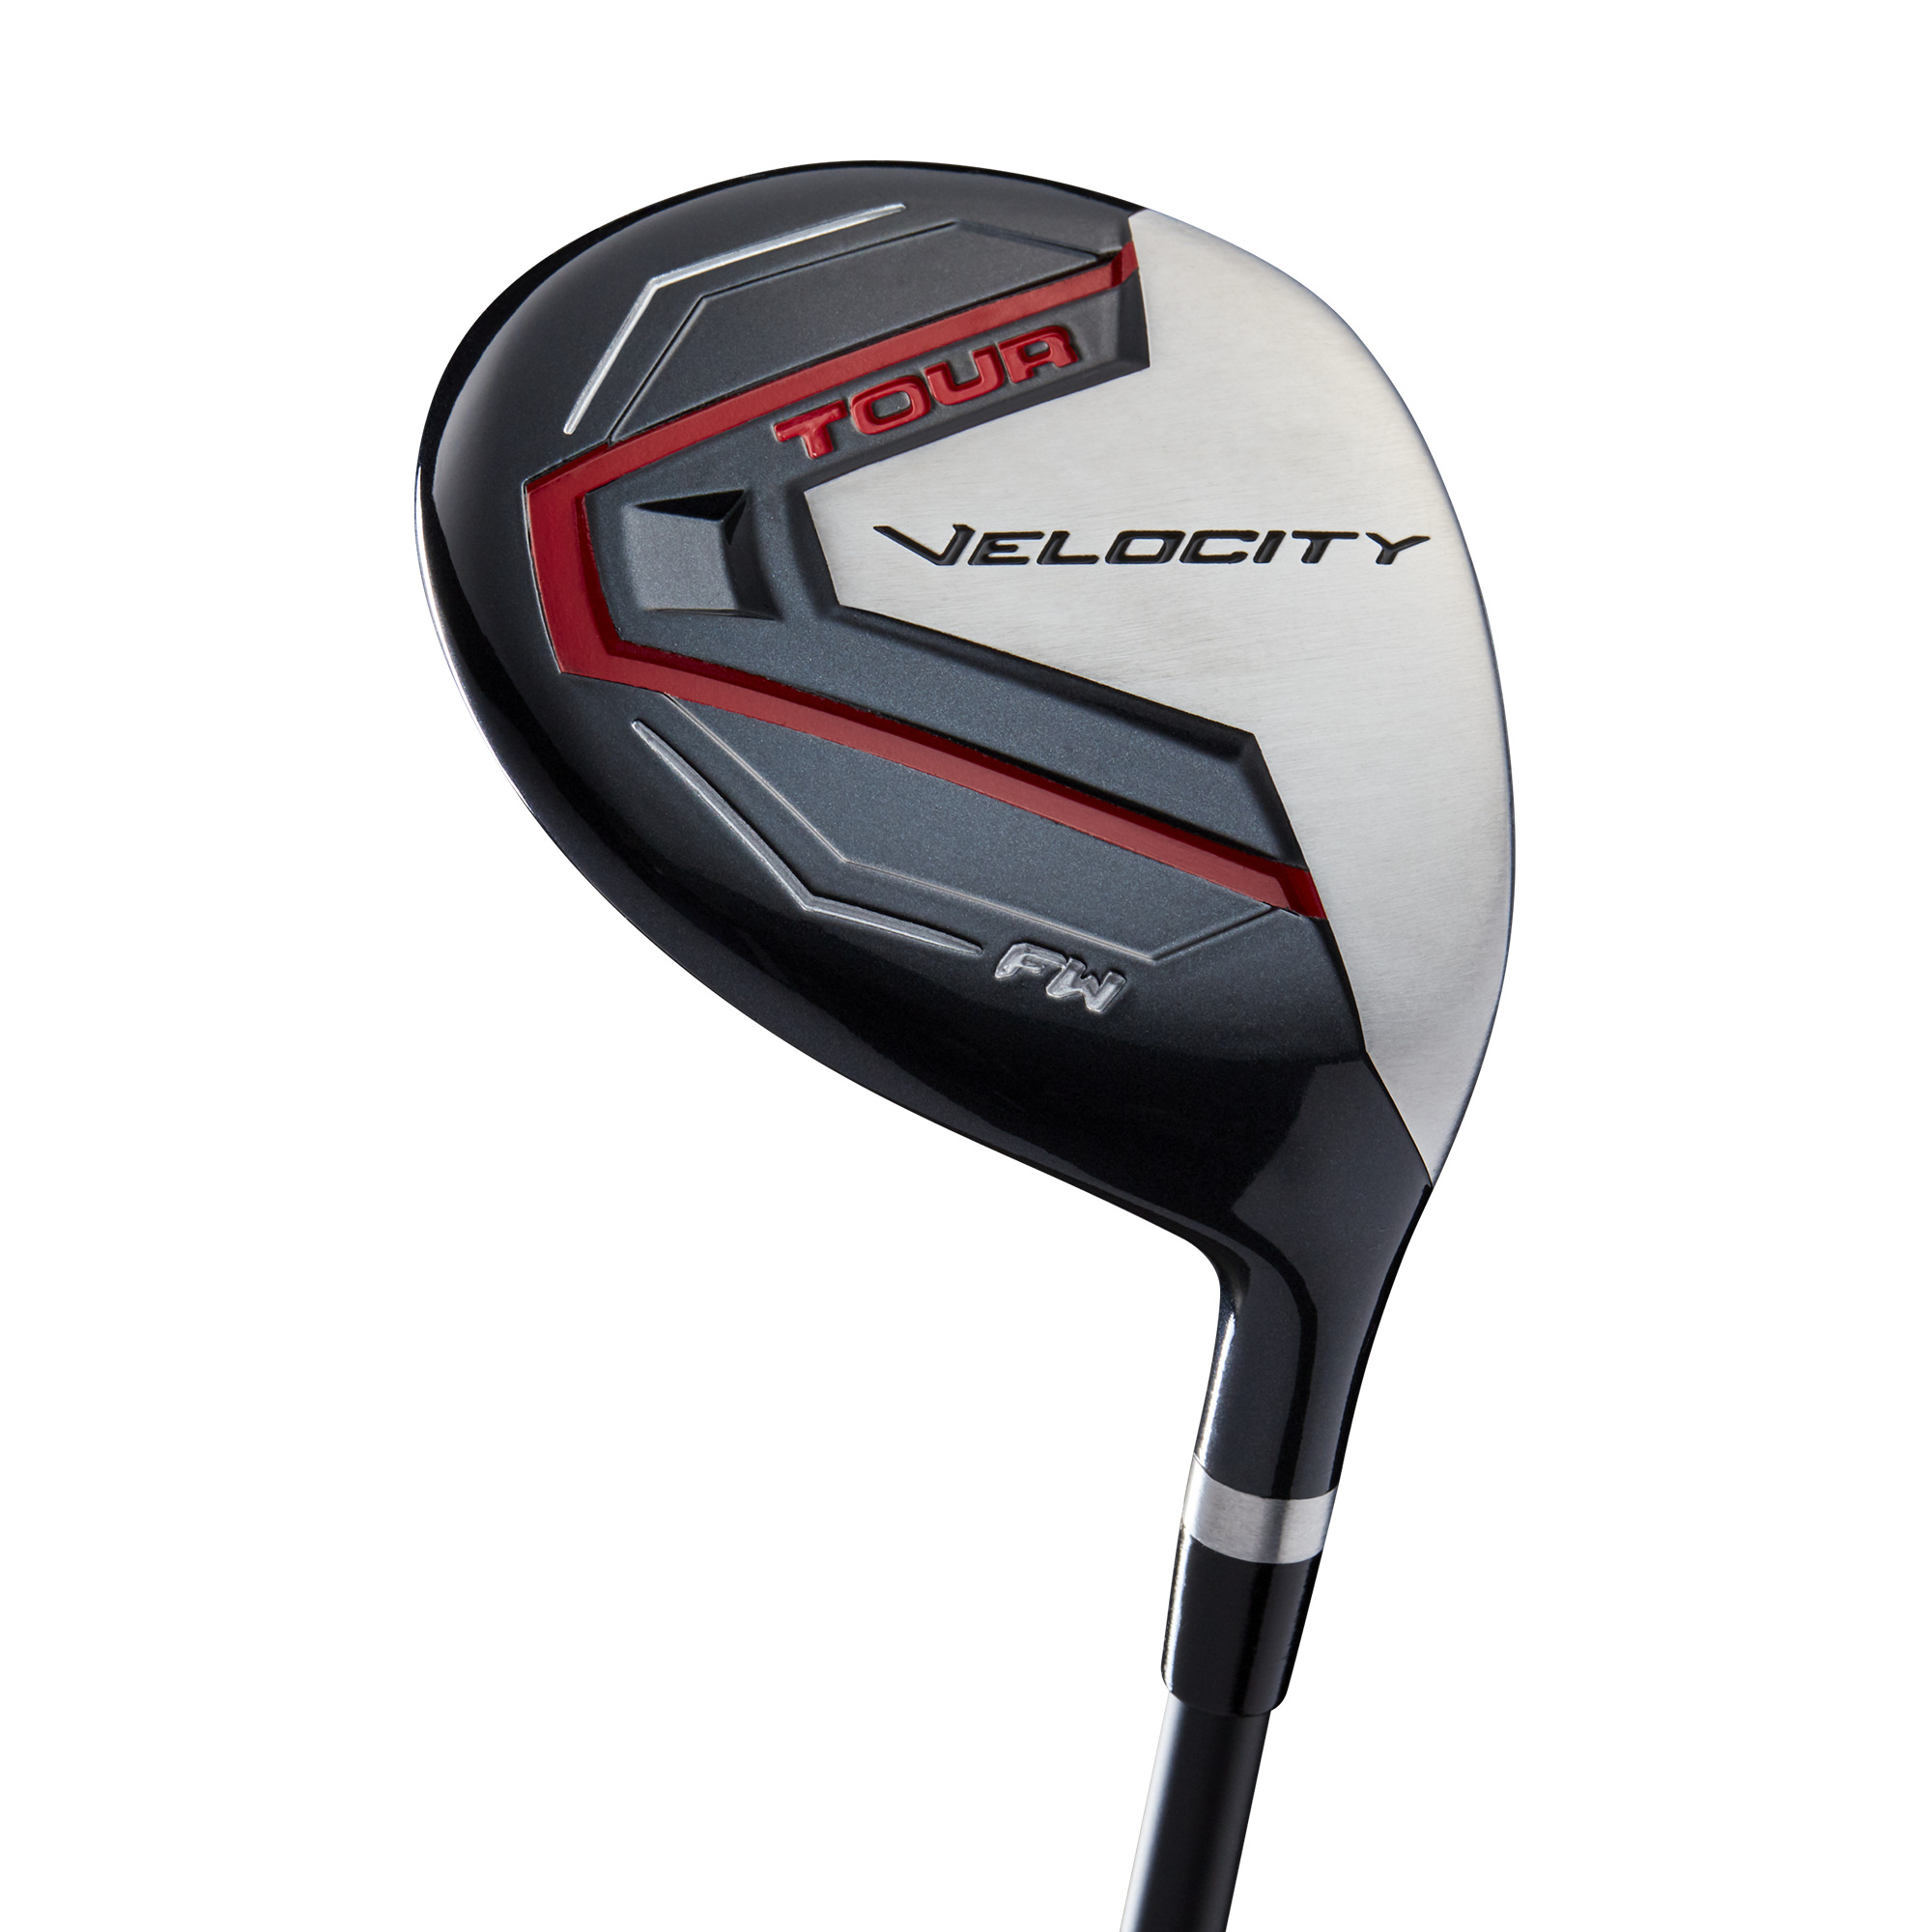 Wilson Tour Velocity Men's Golf Club Set, Right-Handed - image 4 of 7